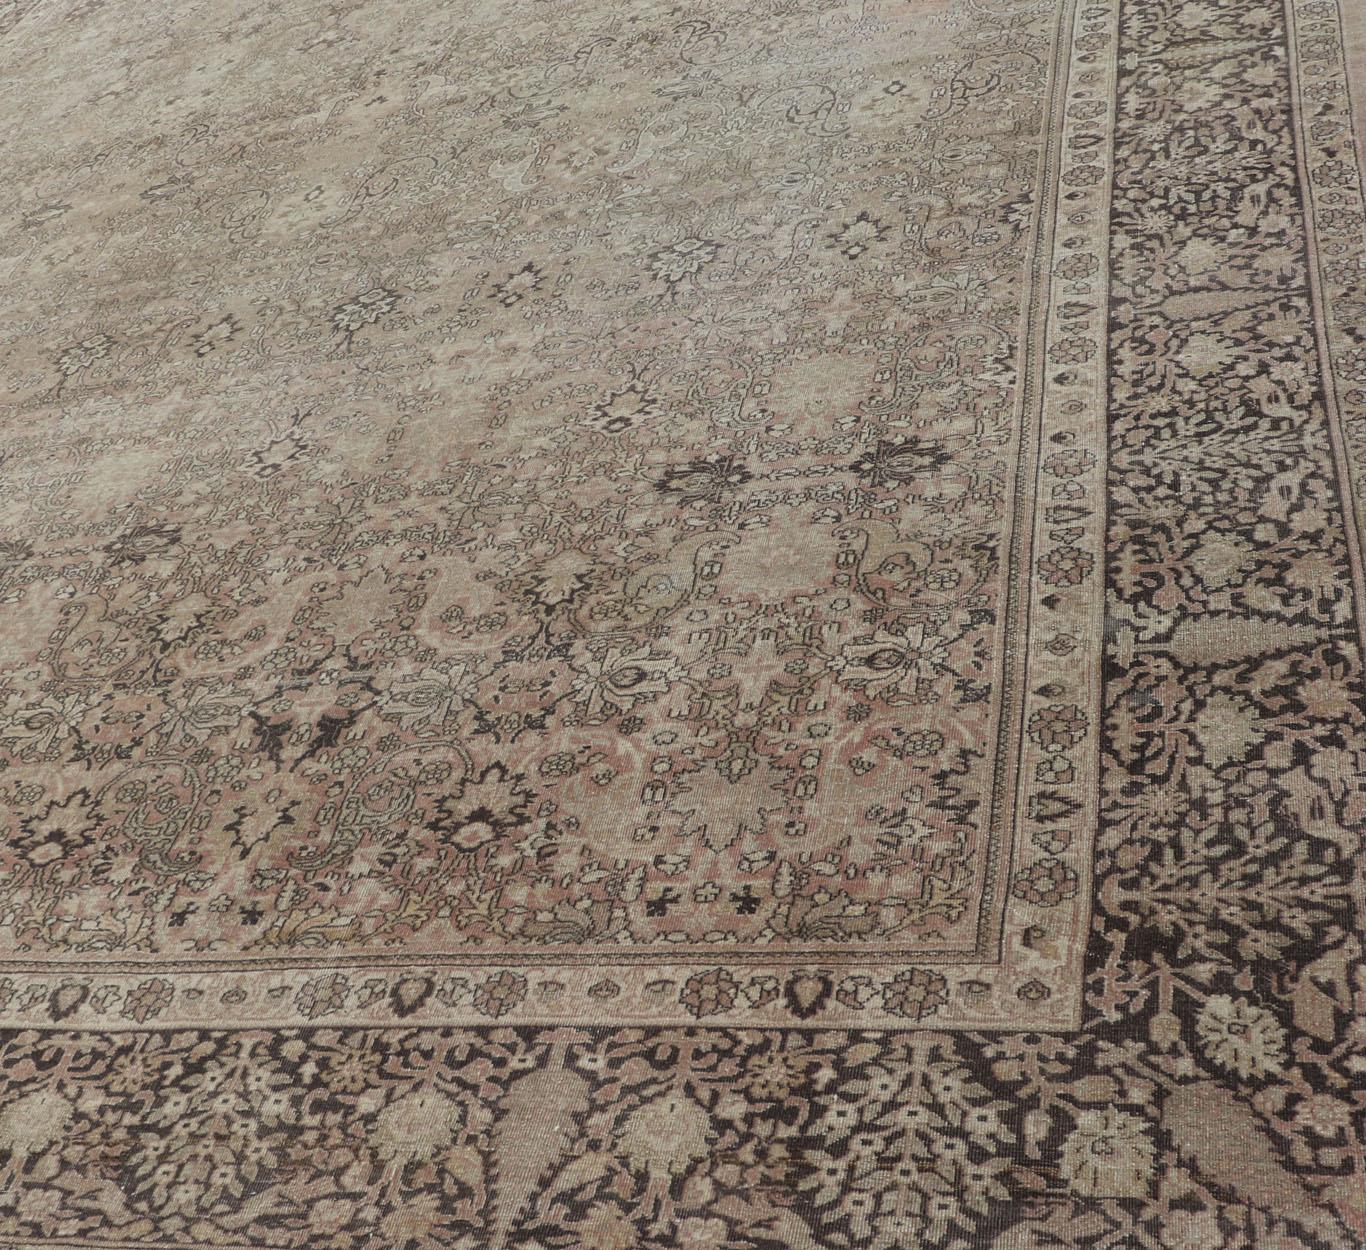 Large Antique Turkish Sivas Rug with Floral Design in Earthy Neutral Tones  For Sale 4